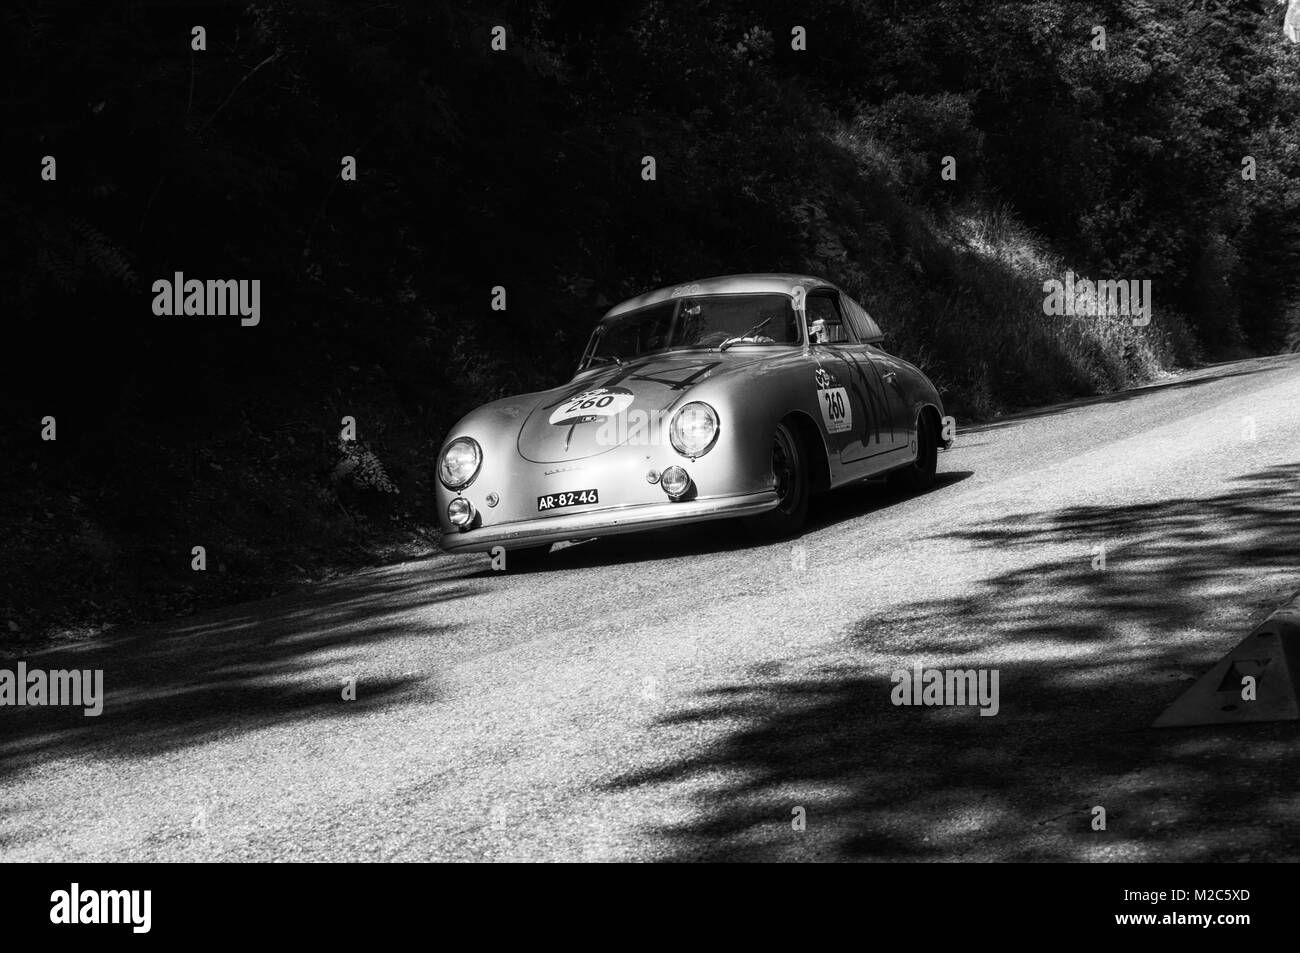 GOLA DEL FURLO, ITALY - MAY 19: PORSCHE 356 1500 SUPER 1952 an old racing car in rally Mille Miglia 2017 the famous italian historical race (1927-1957 Stock Photo